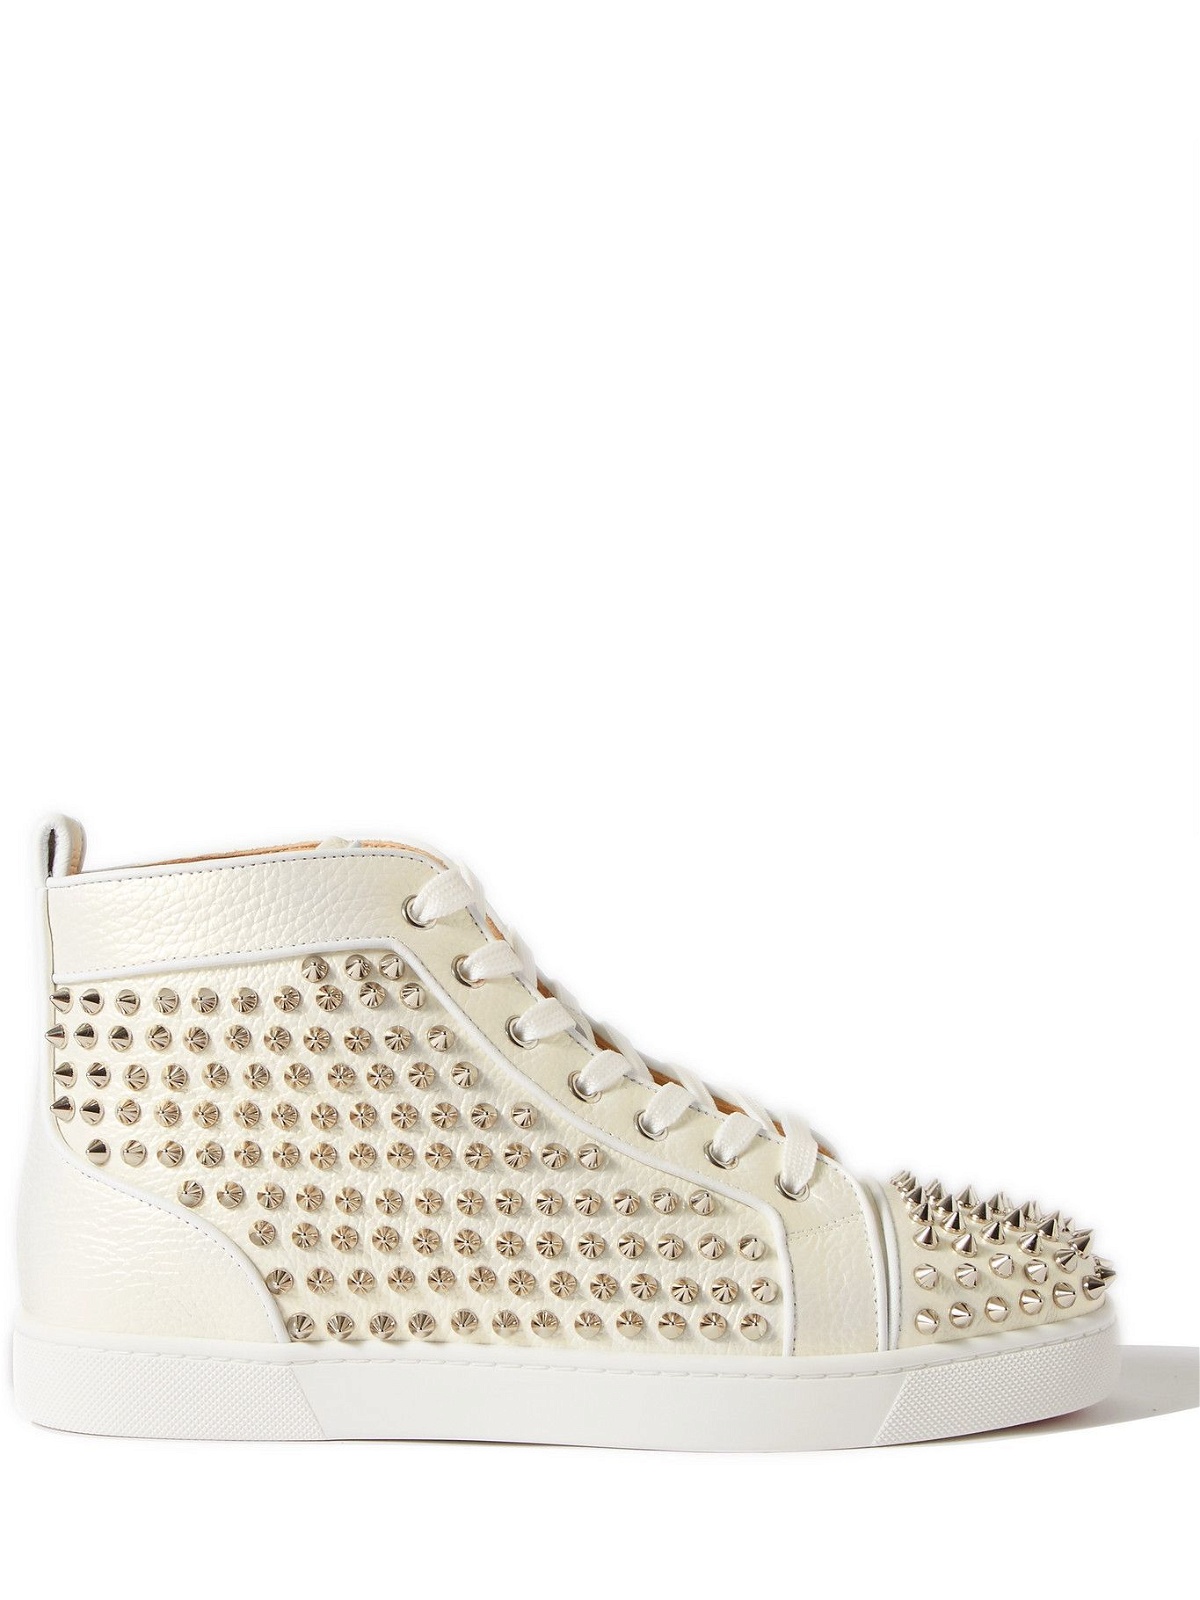 Christian - Louis Spiked Leather Sneakers - White Christian Louboutin